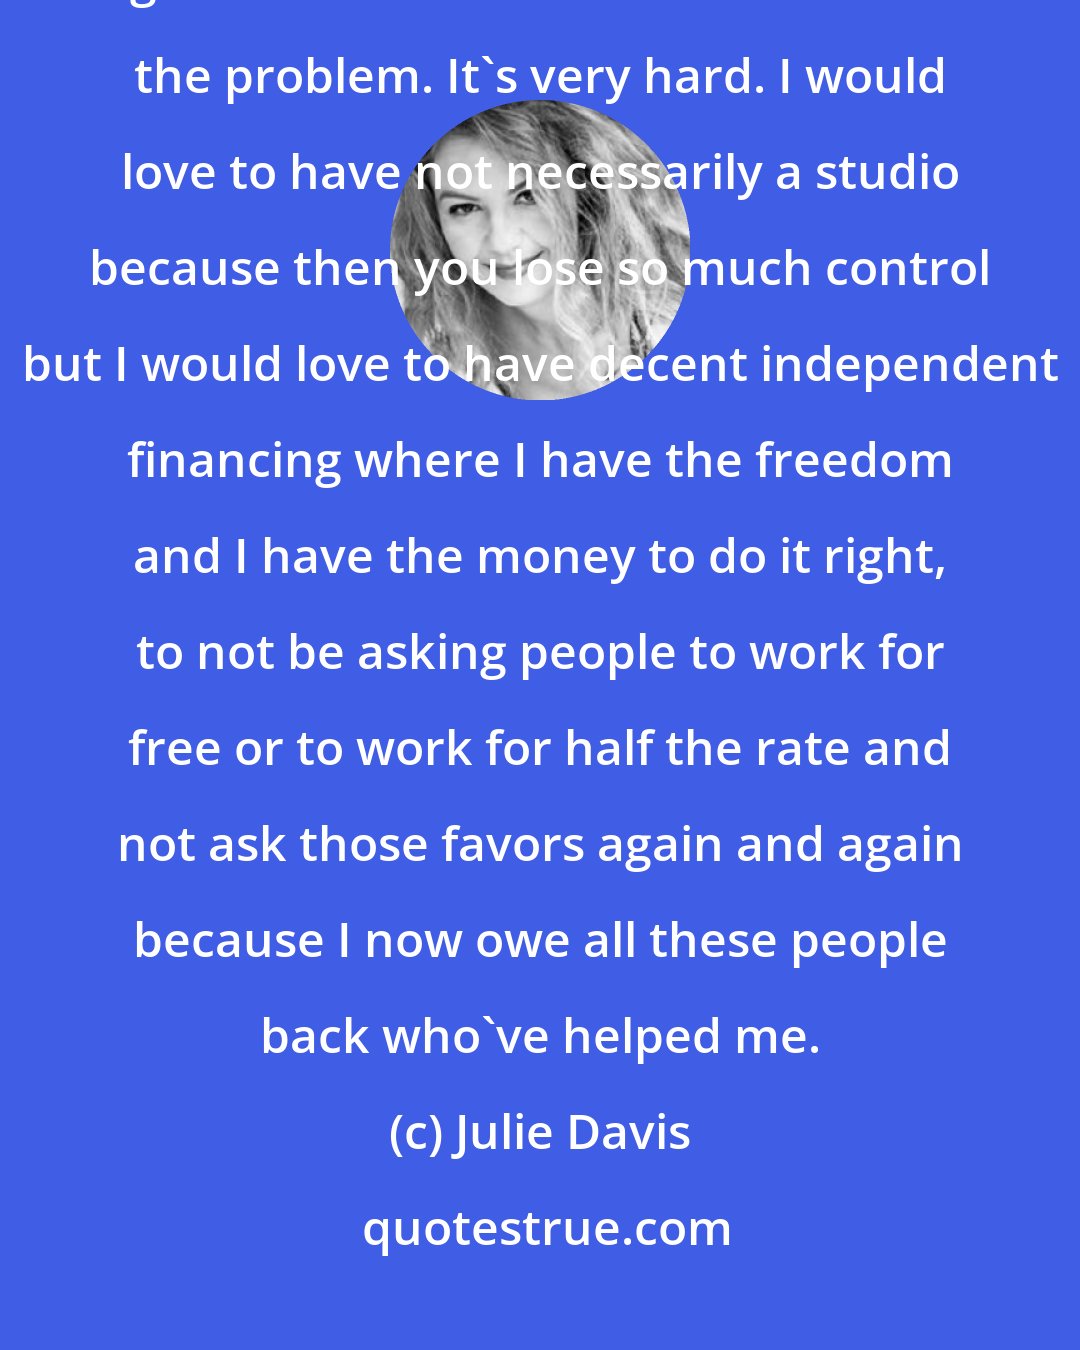 Julie Davis: Money solves a lot of problems and when you don't have money, you've got to do all this other stuff to solve the problem. It's very hard. I would love to have not necessarily a studio because then you lose so much control but I would love to have decent independent financing where I have the freedom and I have the money to do it right, to not be asking people to work for free or to work for half the rate and not ask those favors again and again because I now owe all these people back who've helped me.